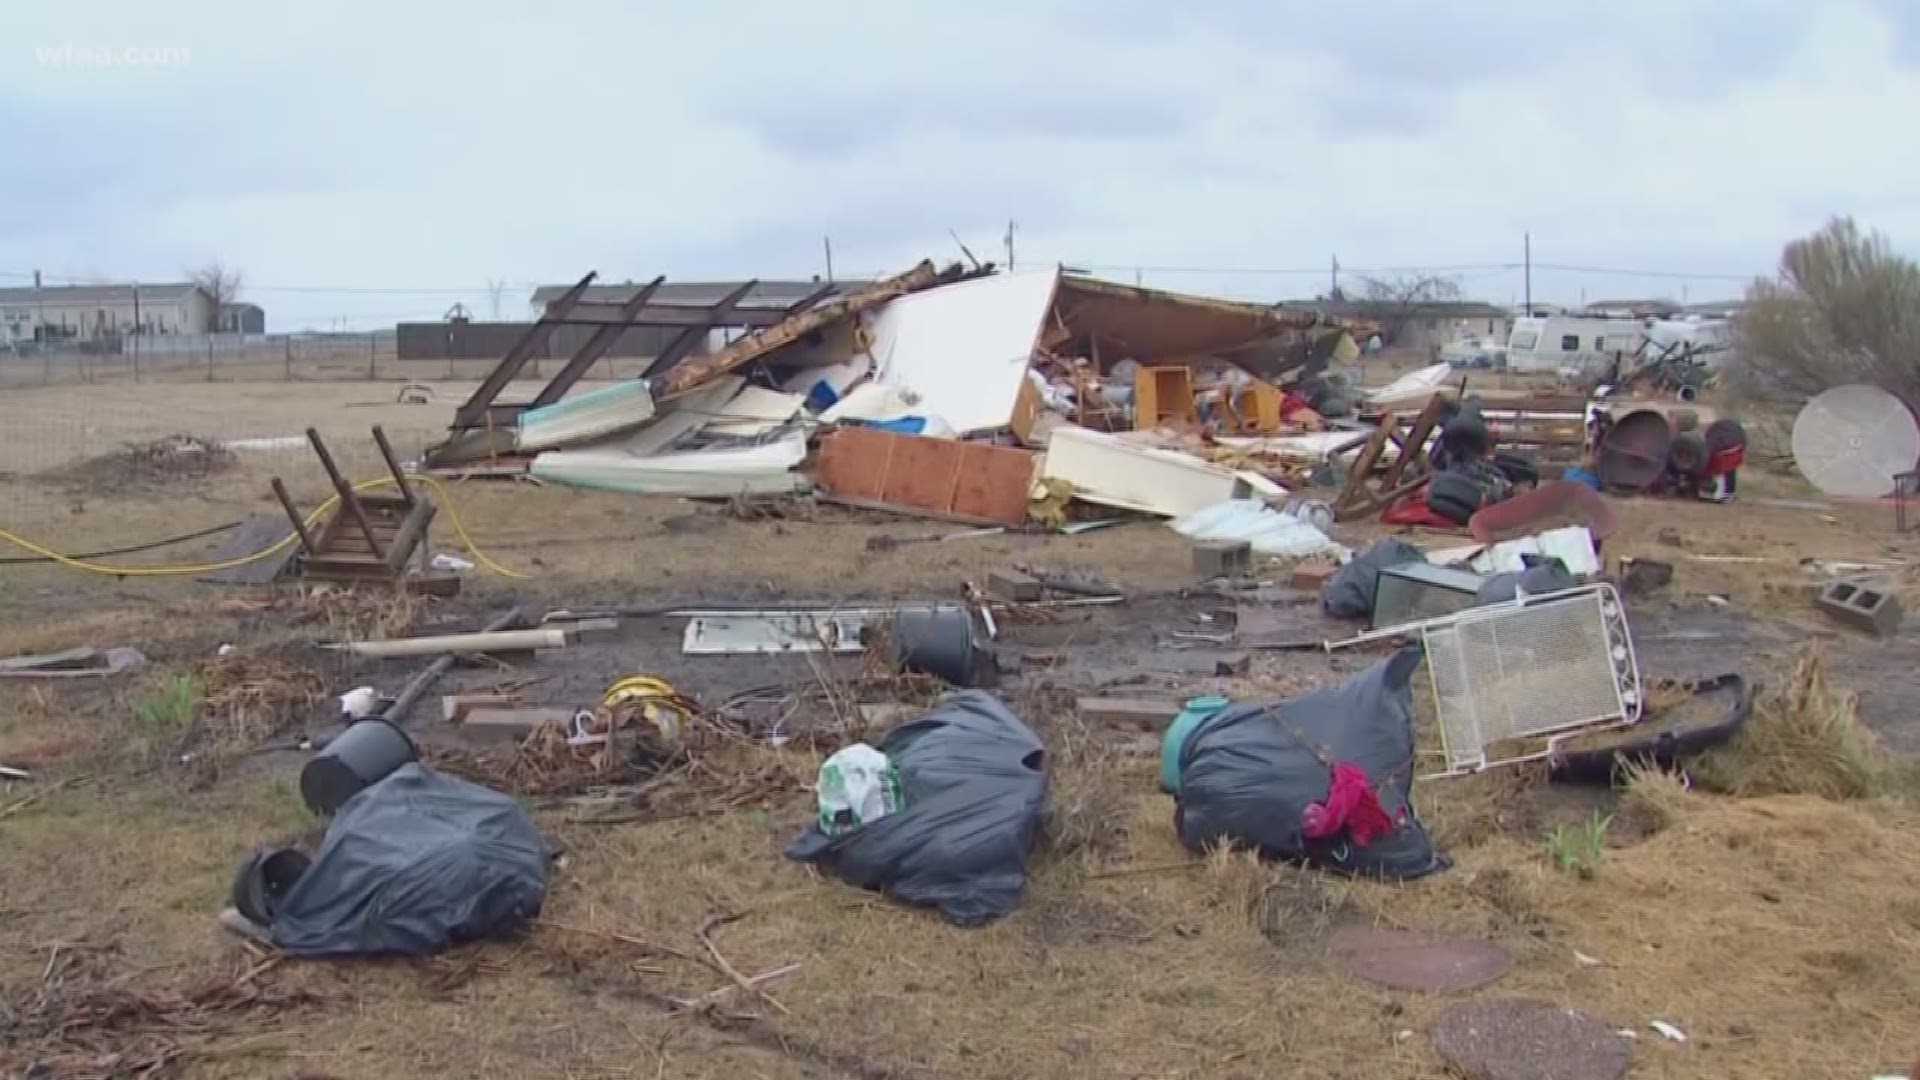 30 houses in DeSoto were damaged by 90-100 mph winds.